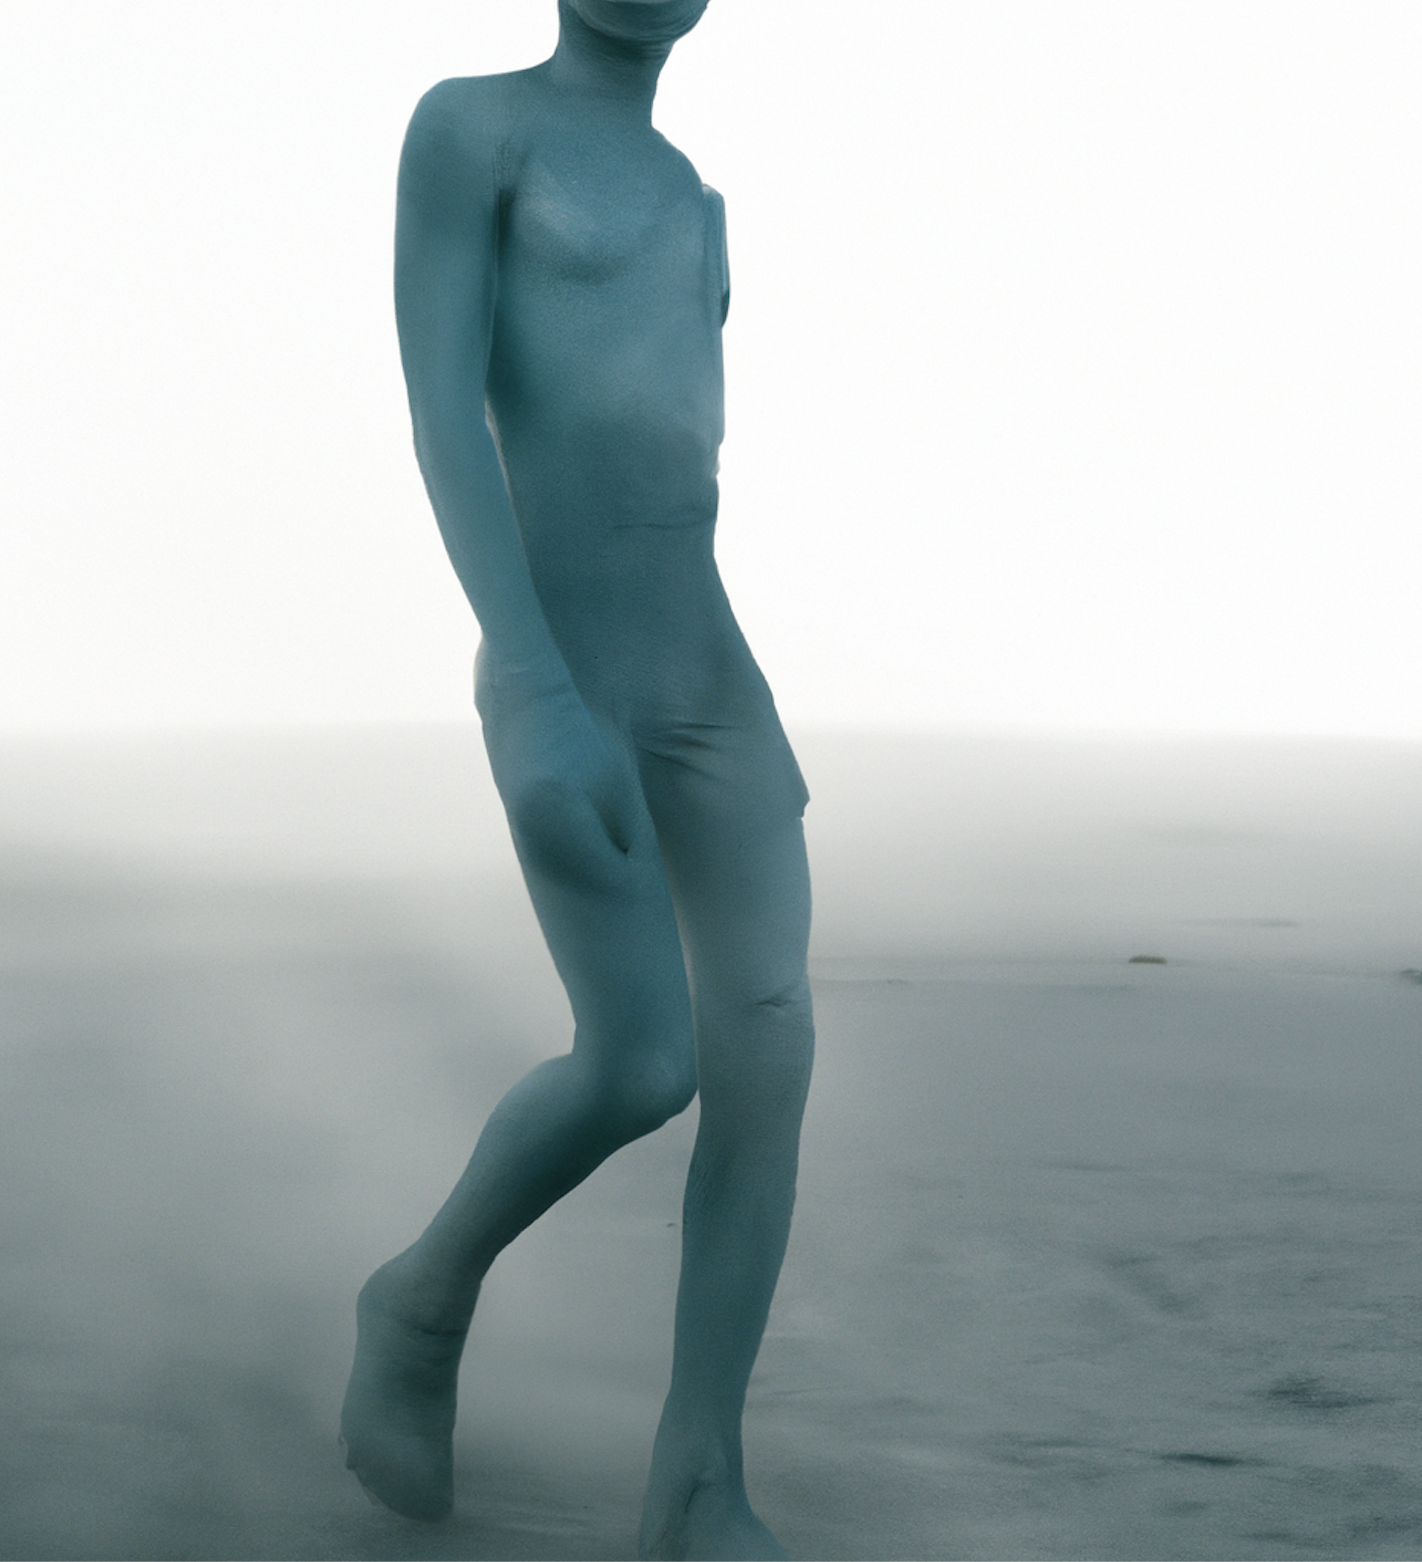 A humanoid figure seen from the chin down, cast in a uniform bluish gray, walks through a colorless desertscape